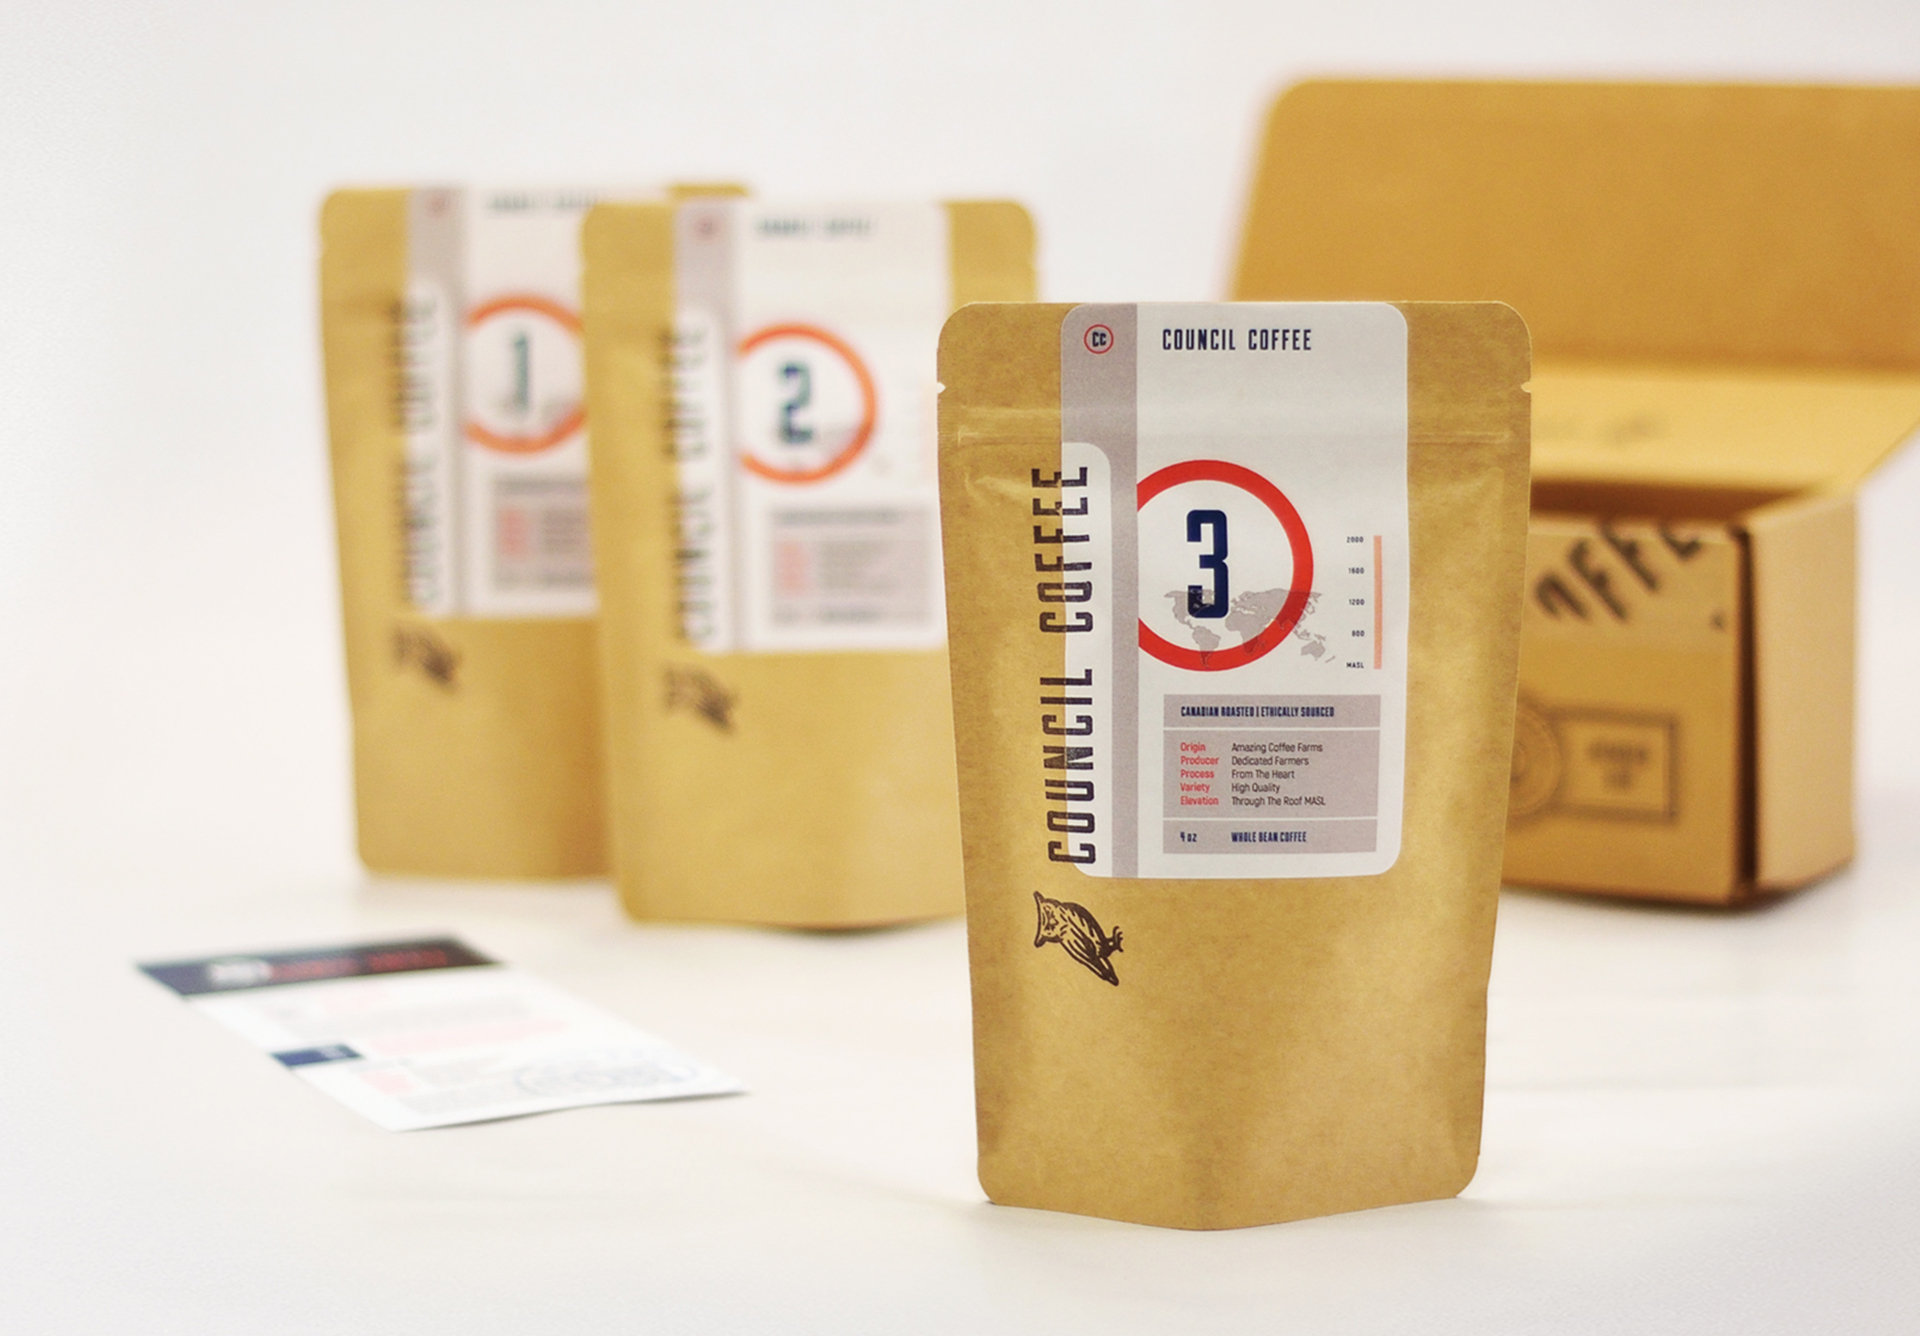 Council Coffee Member Box Packaging